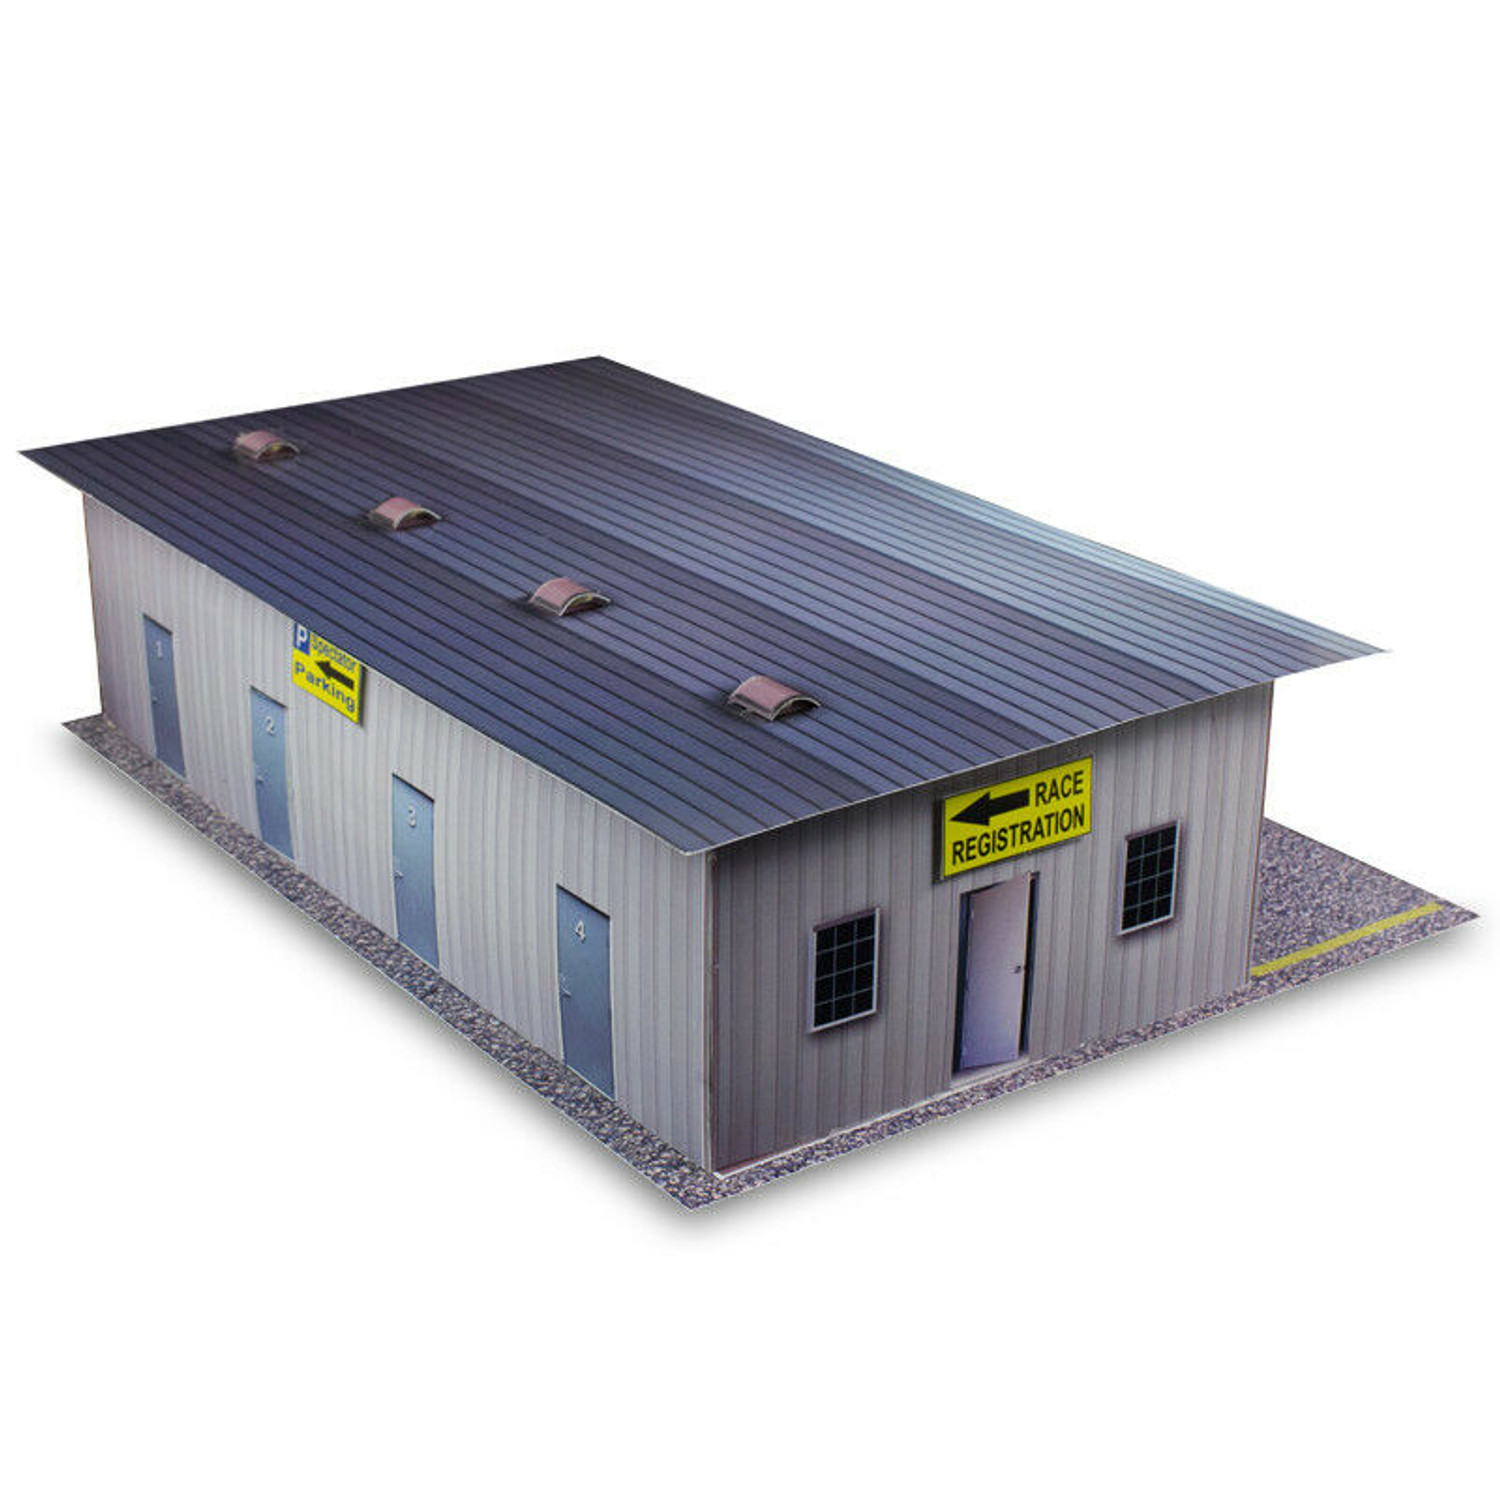 BK 6411 1:64 Scale "4 Stall Pit Garage" Photo Real Scale Building Kit